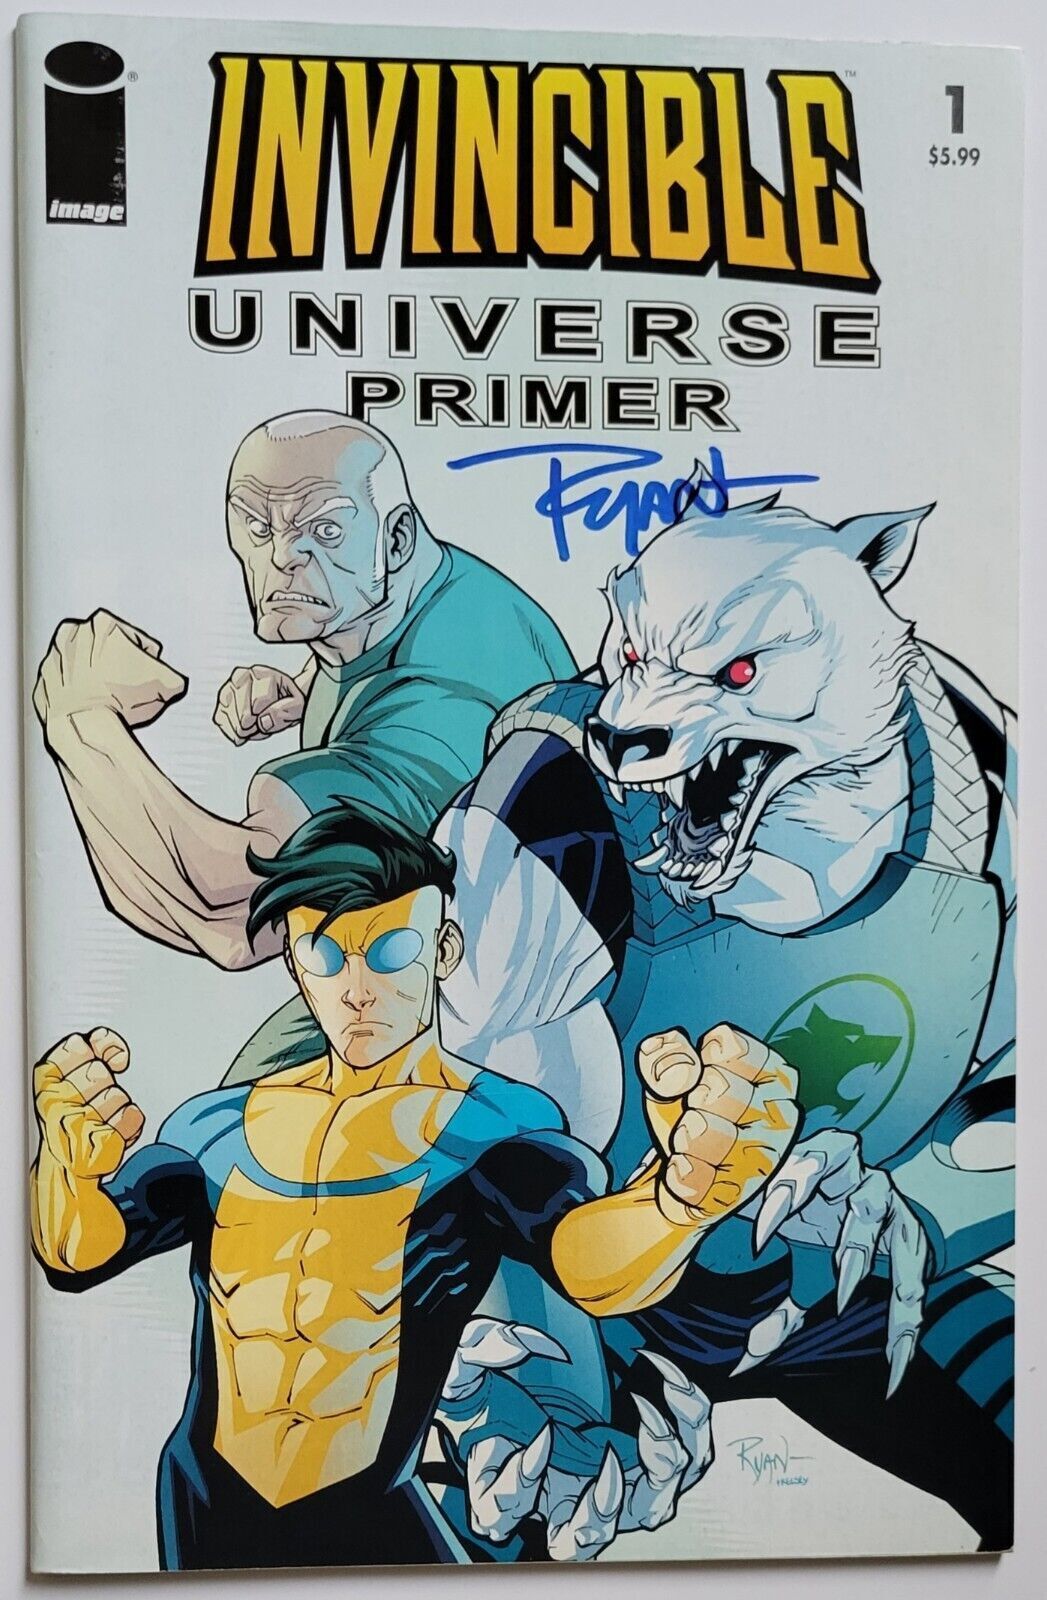 Invincible Image You Pick 0-144 Best Selection On Ebay /NEW STOCK ADDED WEEKLY